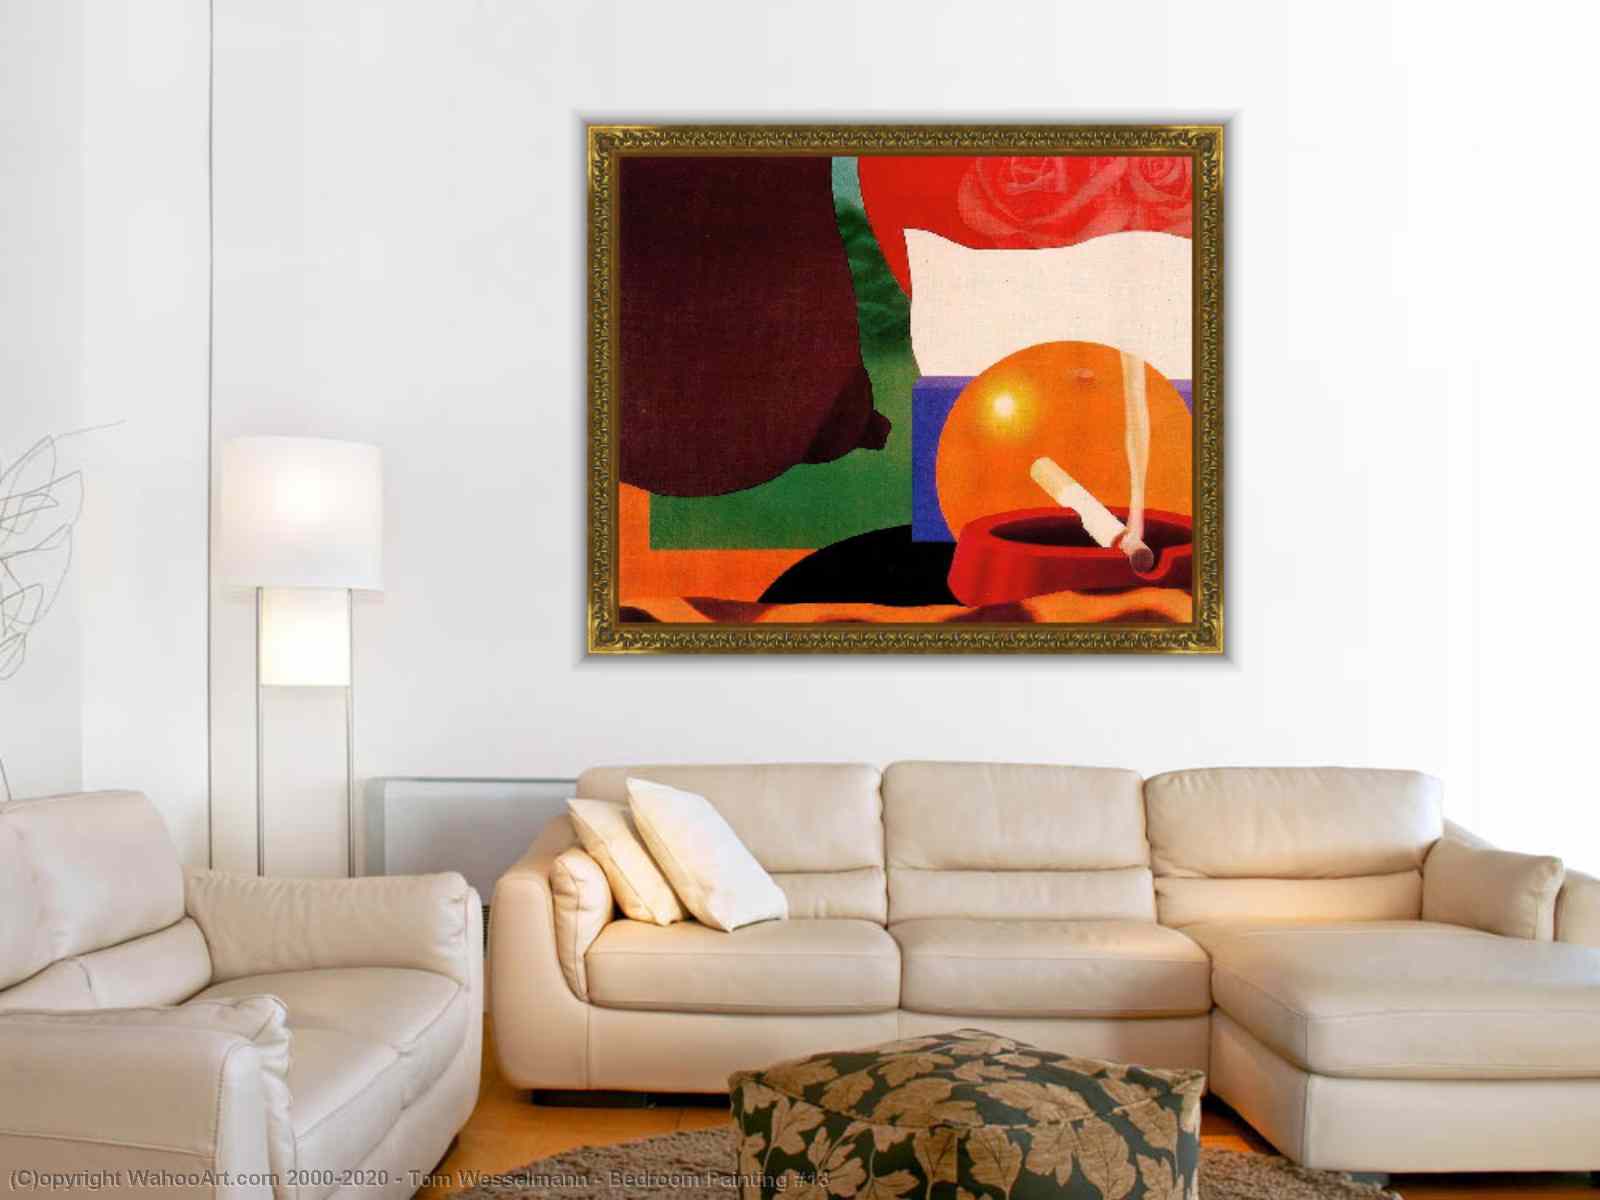 Museum Art Reproductions Pop Painting Wesselmann by Tom (Inspired -13 Bedroom Art By)